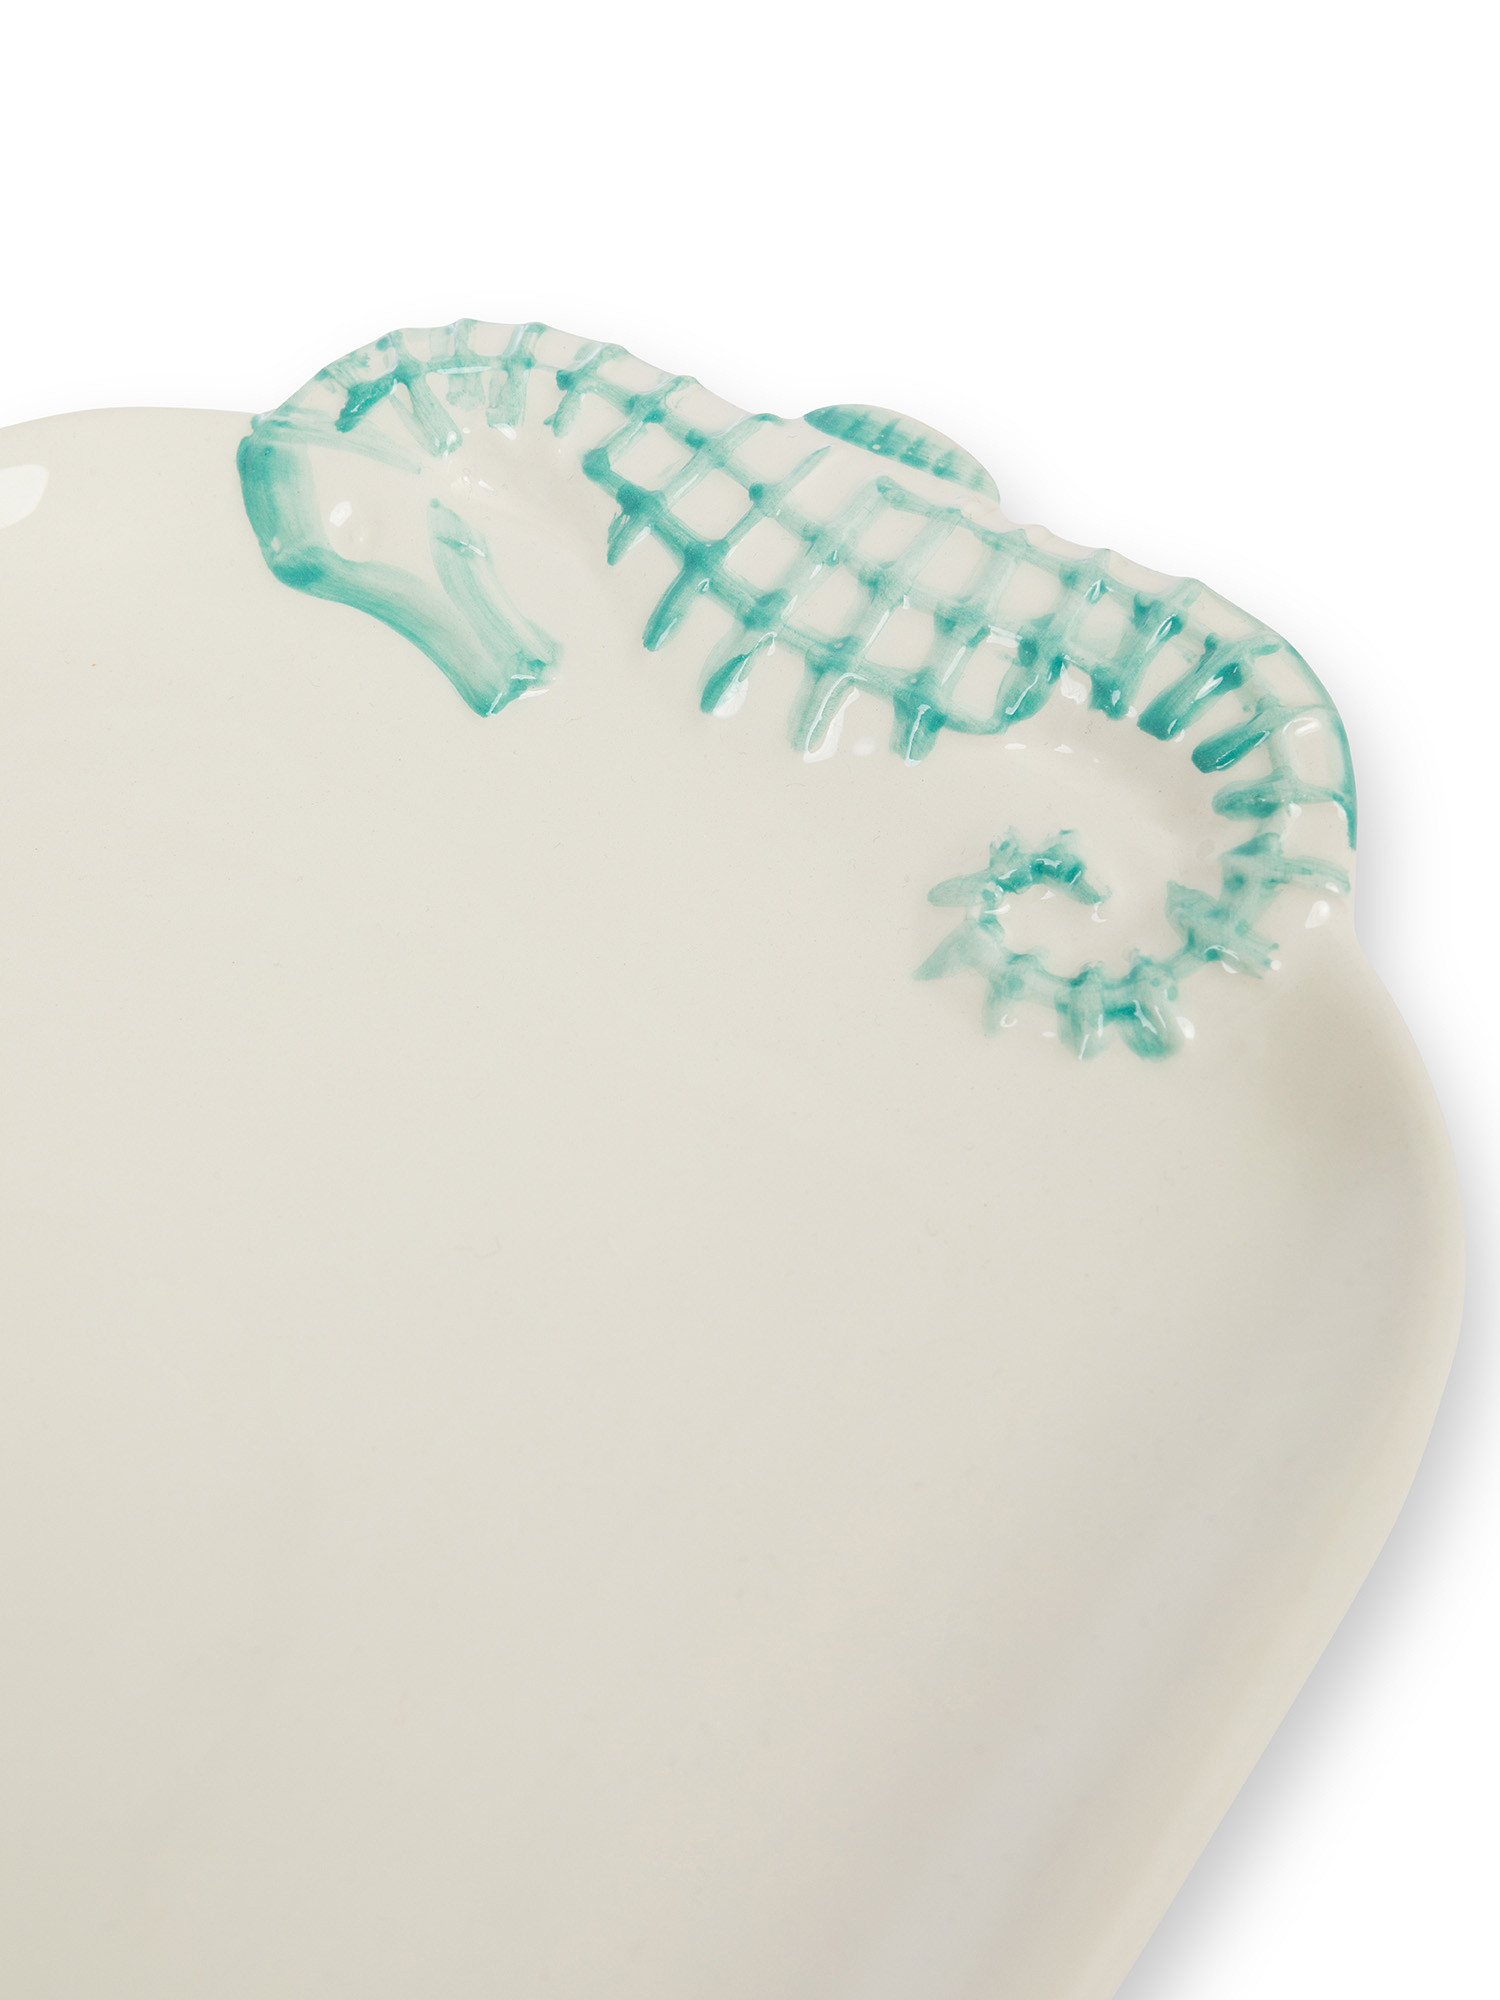 Ceramic tray with seahorse decoration, White / Blue, large image number 1